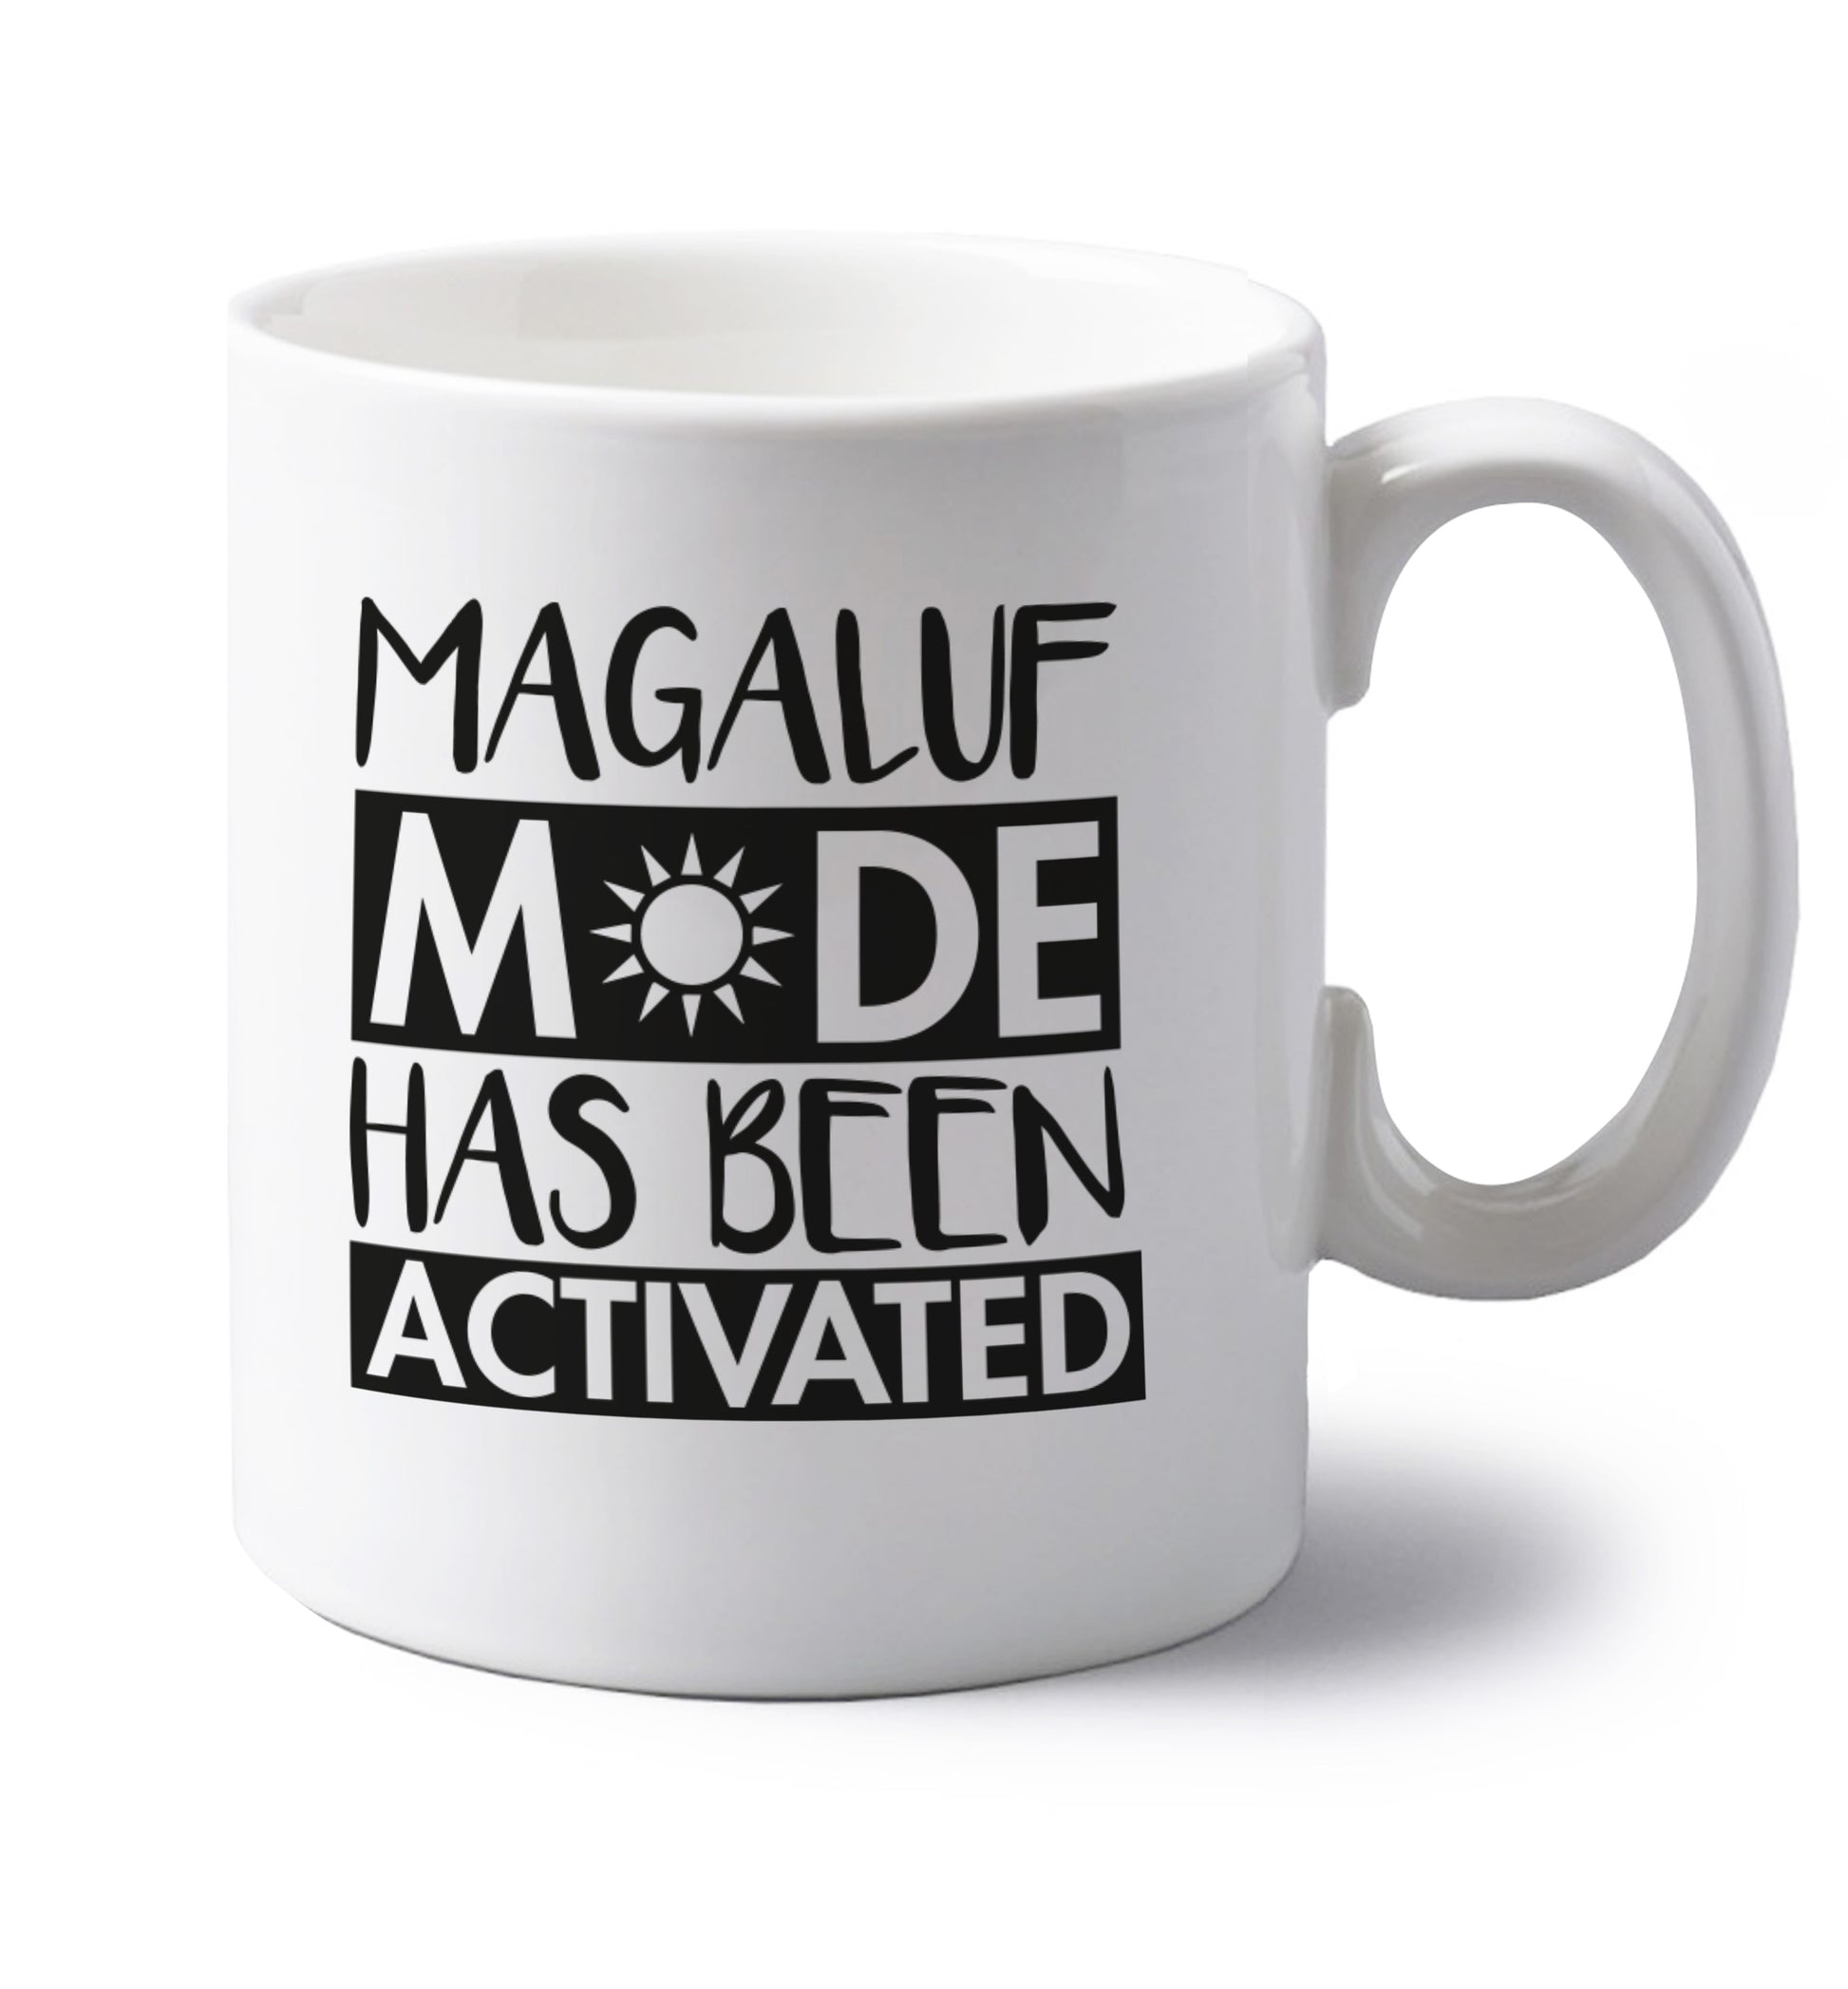 Magaluf mode has been activated left handed white ceramic mug 